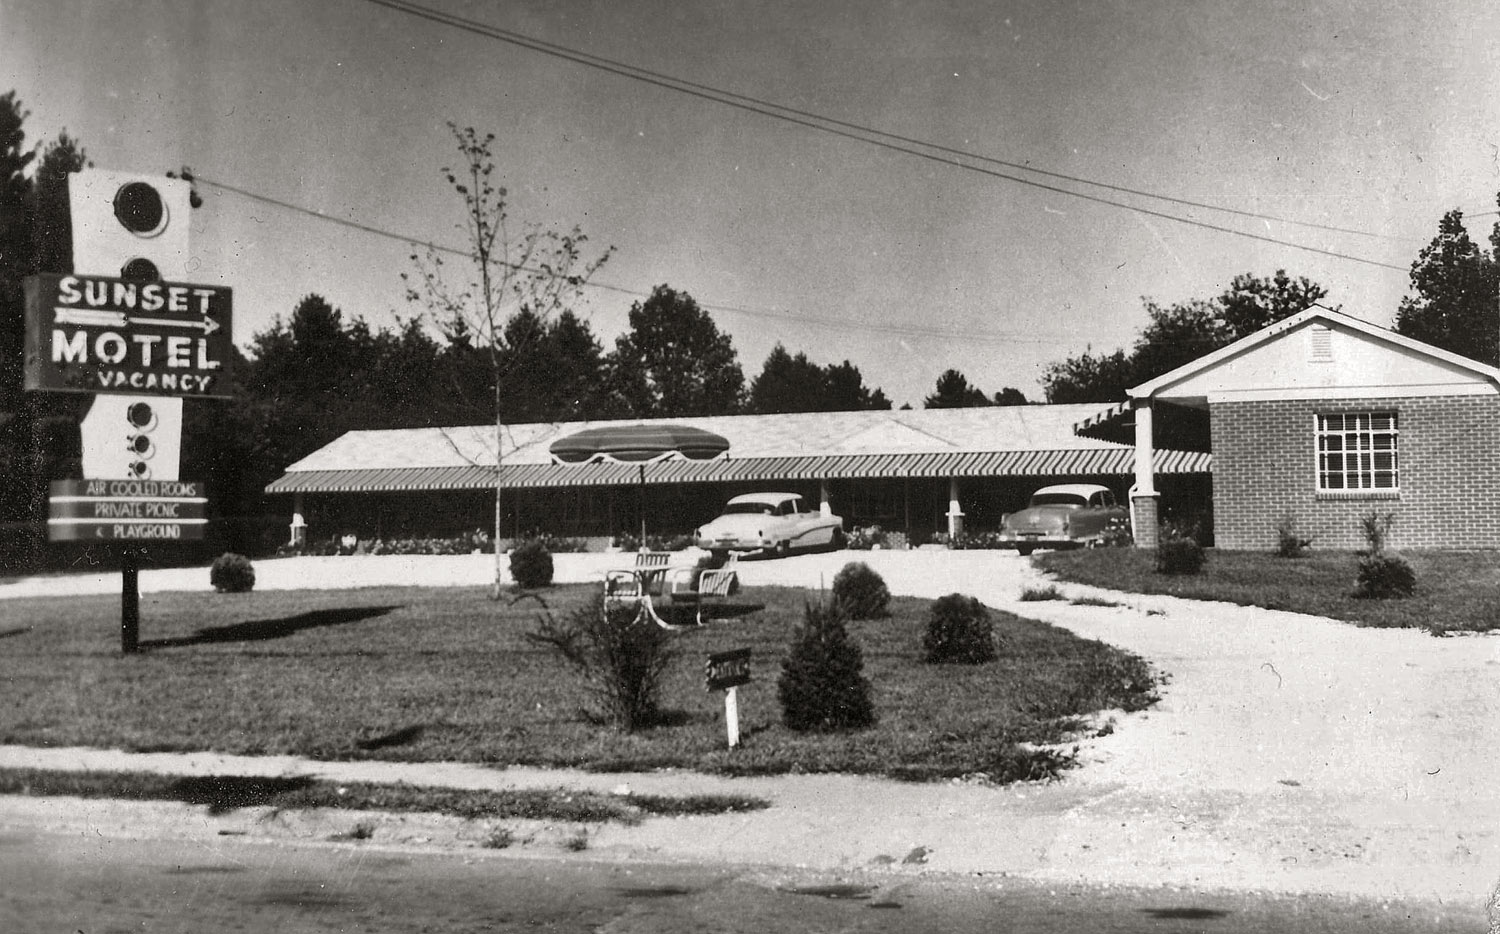 The Sunset Motel in 1957. Brevard, South Carolina. View full size.